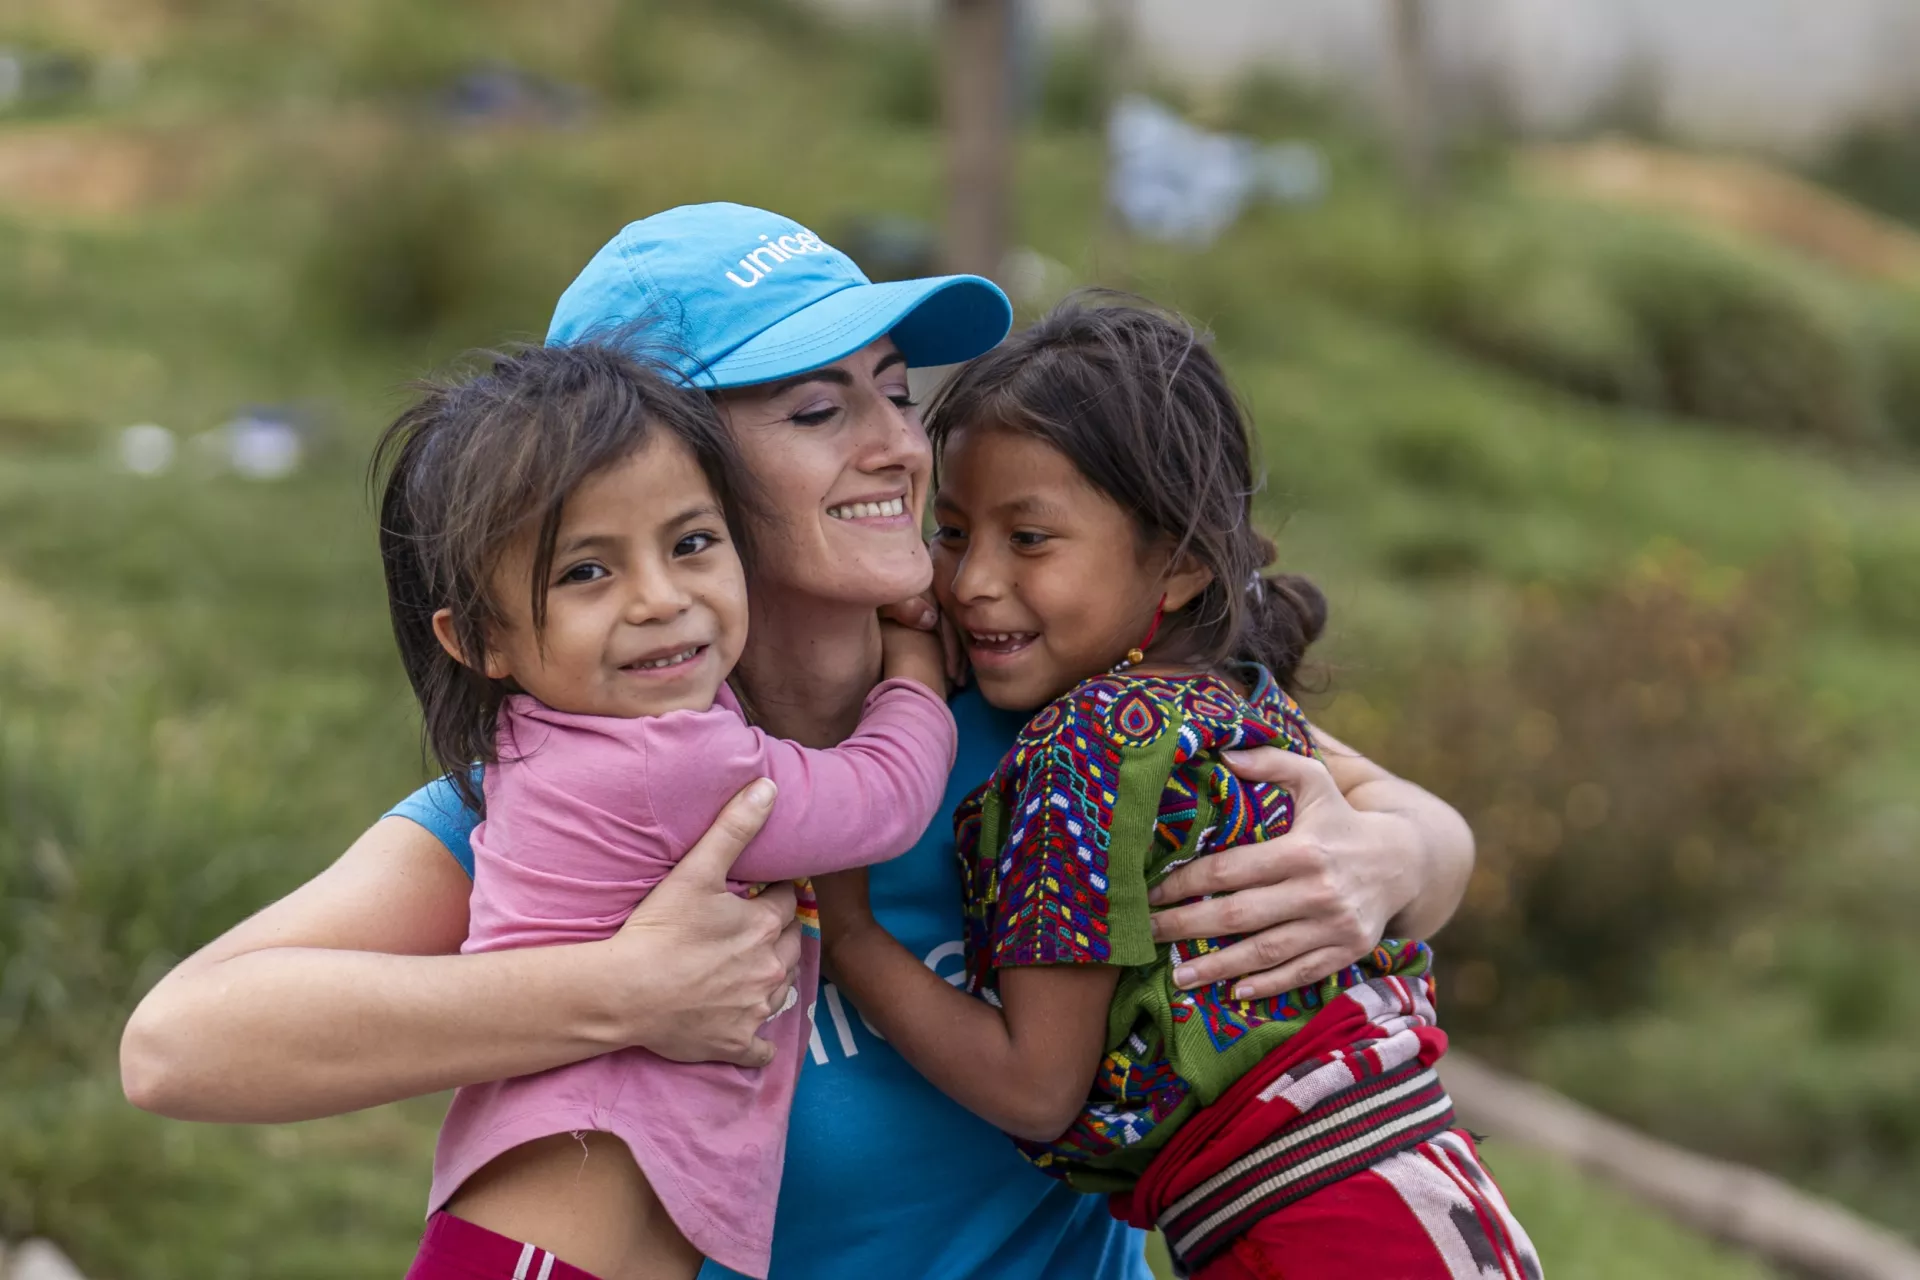 Woman wearing UNICEF hat and t-shirt hugs two young girls. They all smile.